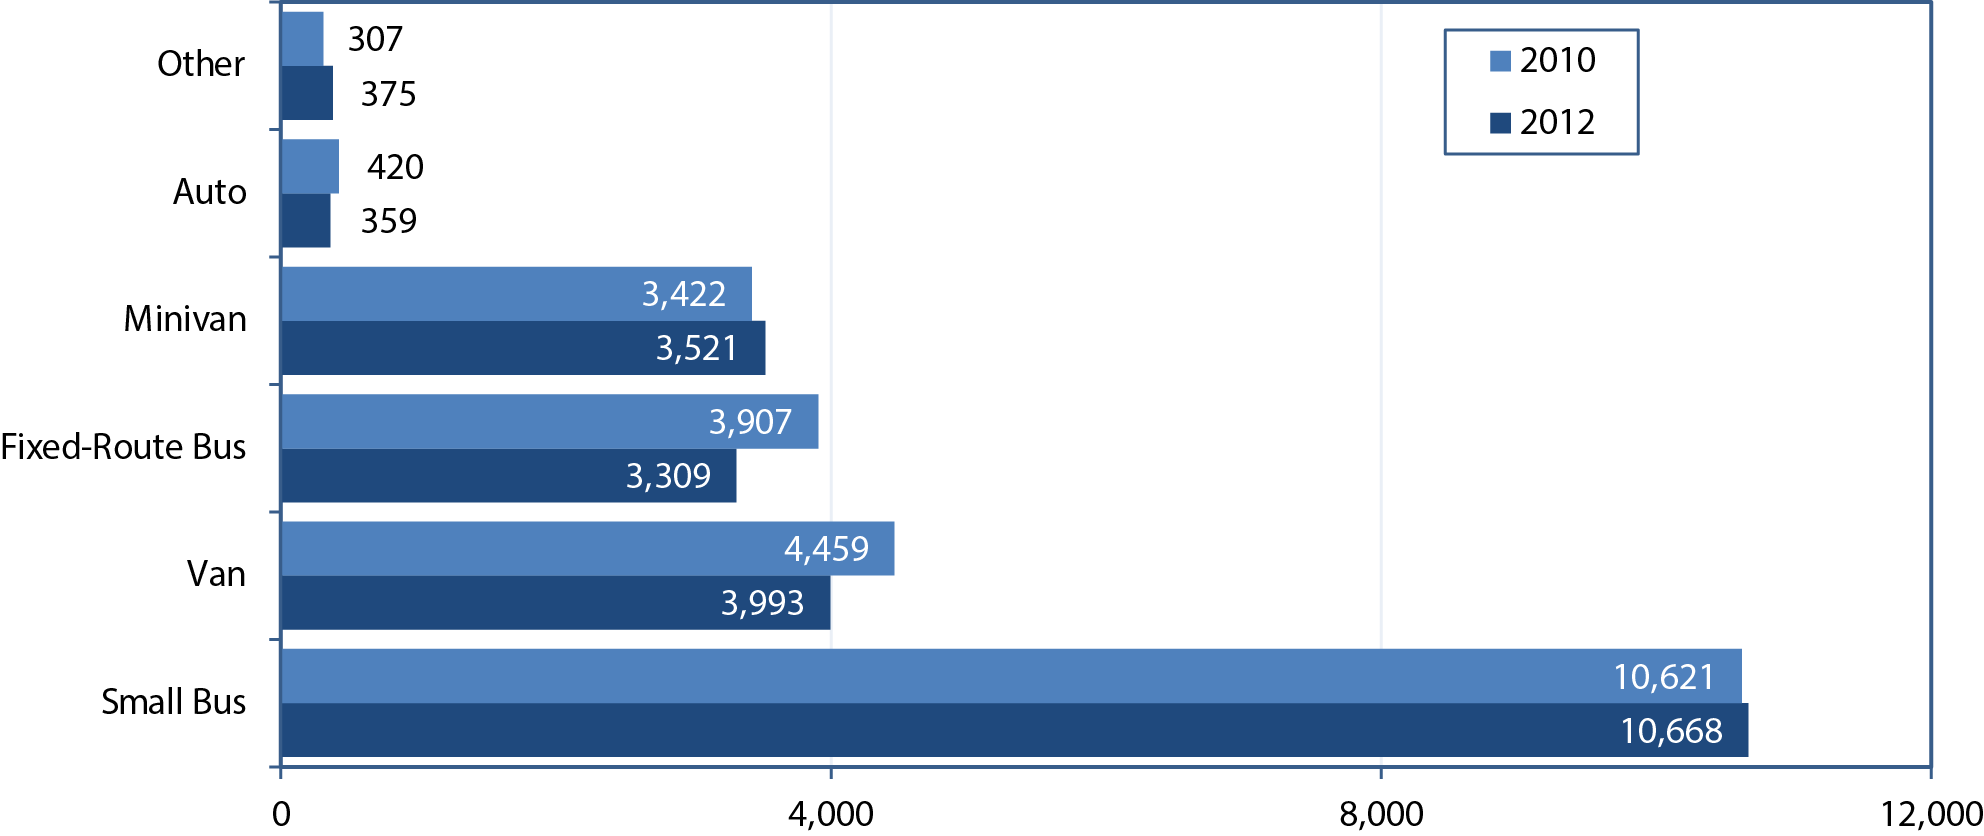 A horizontal bar chart shows the distribution of rural transit vehicles across six categories for 2010 and 2012. In 2010, the category small bus accounts for 10,621 vehicles; van accounts for 4,459 vehicles; fixed-route bus accounts for 3,907 vehicles; minivan accounts for 3,422 vehicles; auto accounts for 420 vehicles; and other accounts for 307 vehicles. In 2012, the category small bus accounts for 10,668 vehicles; van accounts for 3,993 vehicles; fixed-route bus accounts for 3,309 vehicles; minivan accounts for 3,521 vehicles; auto accounts for 359 vehicles; and other accounts for 375 vehicles. Source: National Transit Database. 